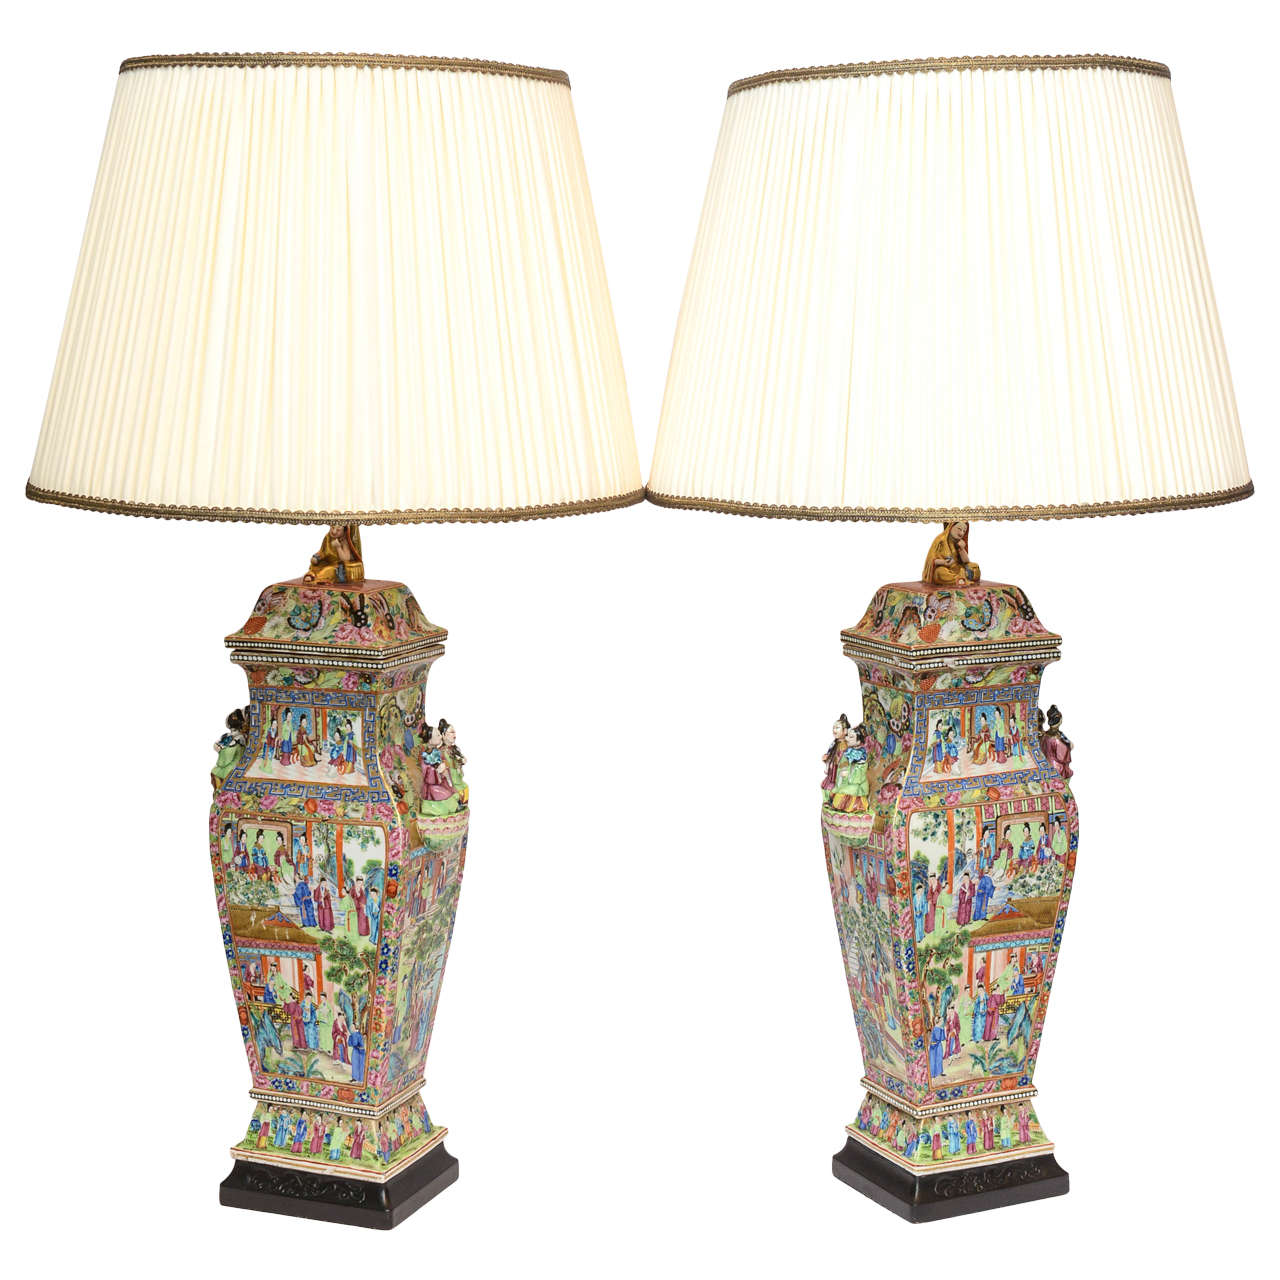 Vey Fine and Presentful Pair of Chinese Canton Covered Vase Lamps For Sale